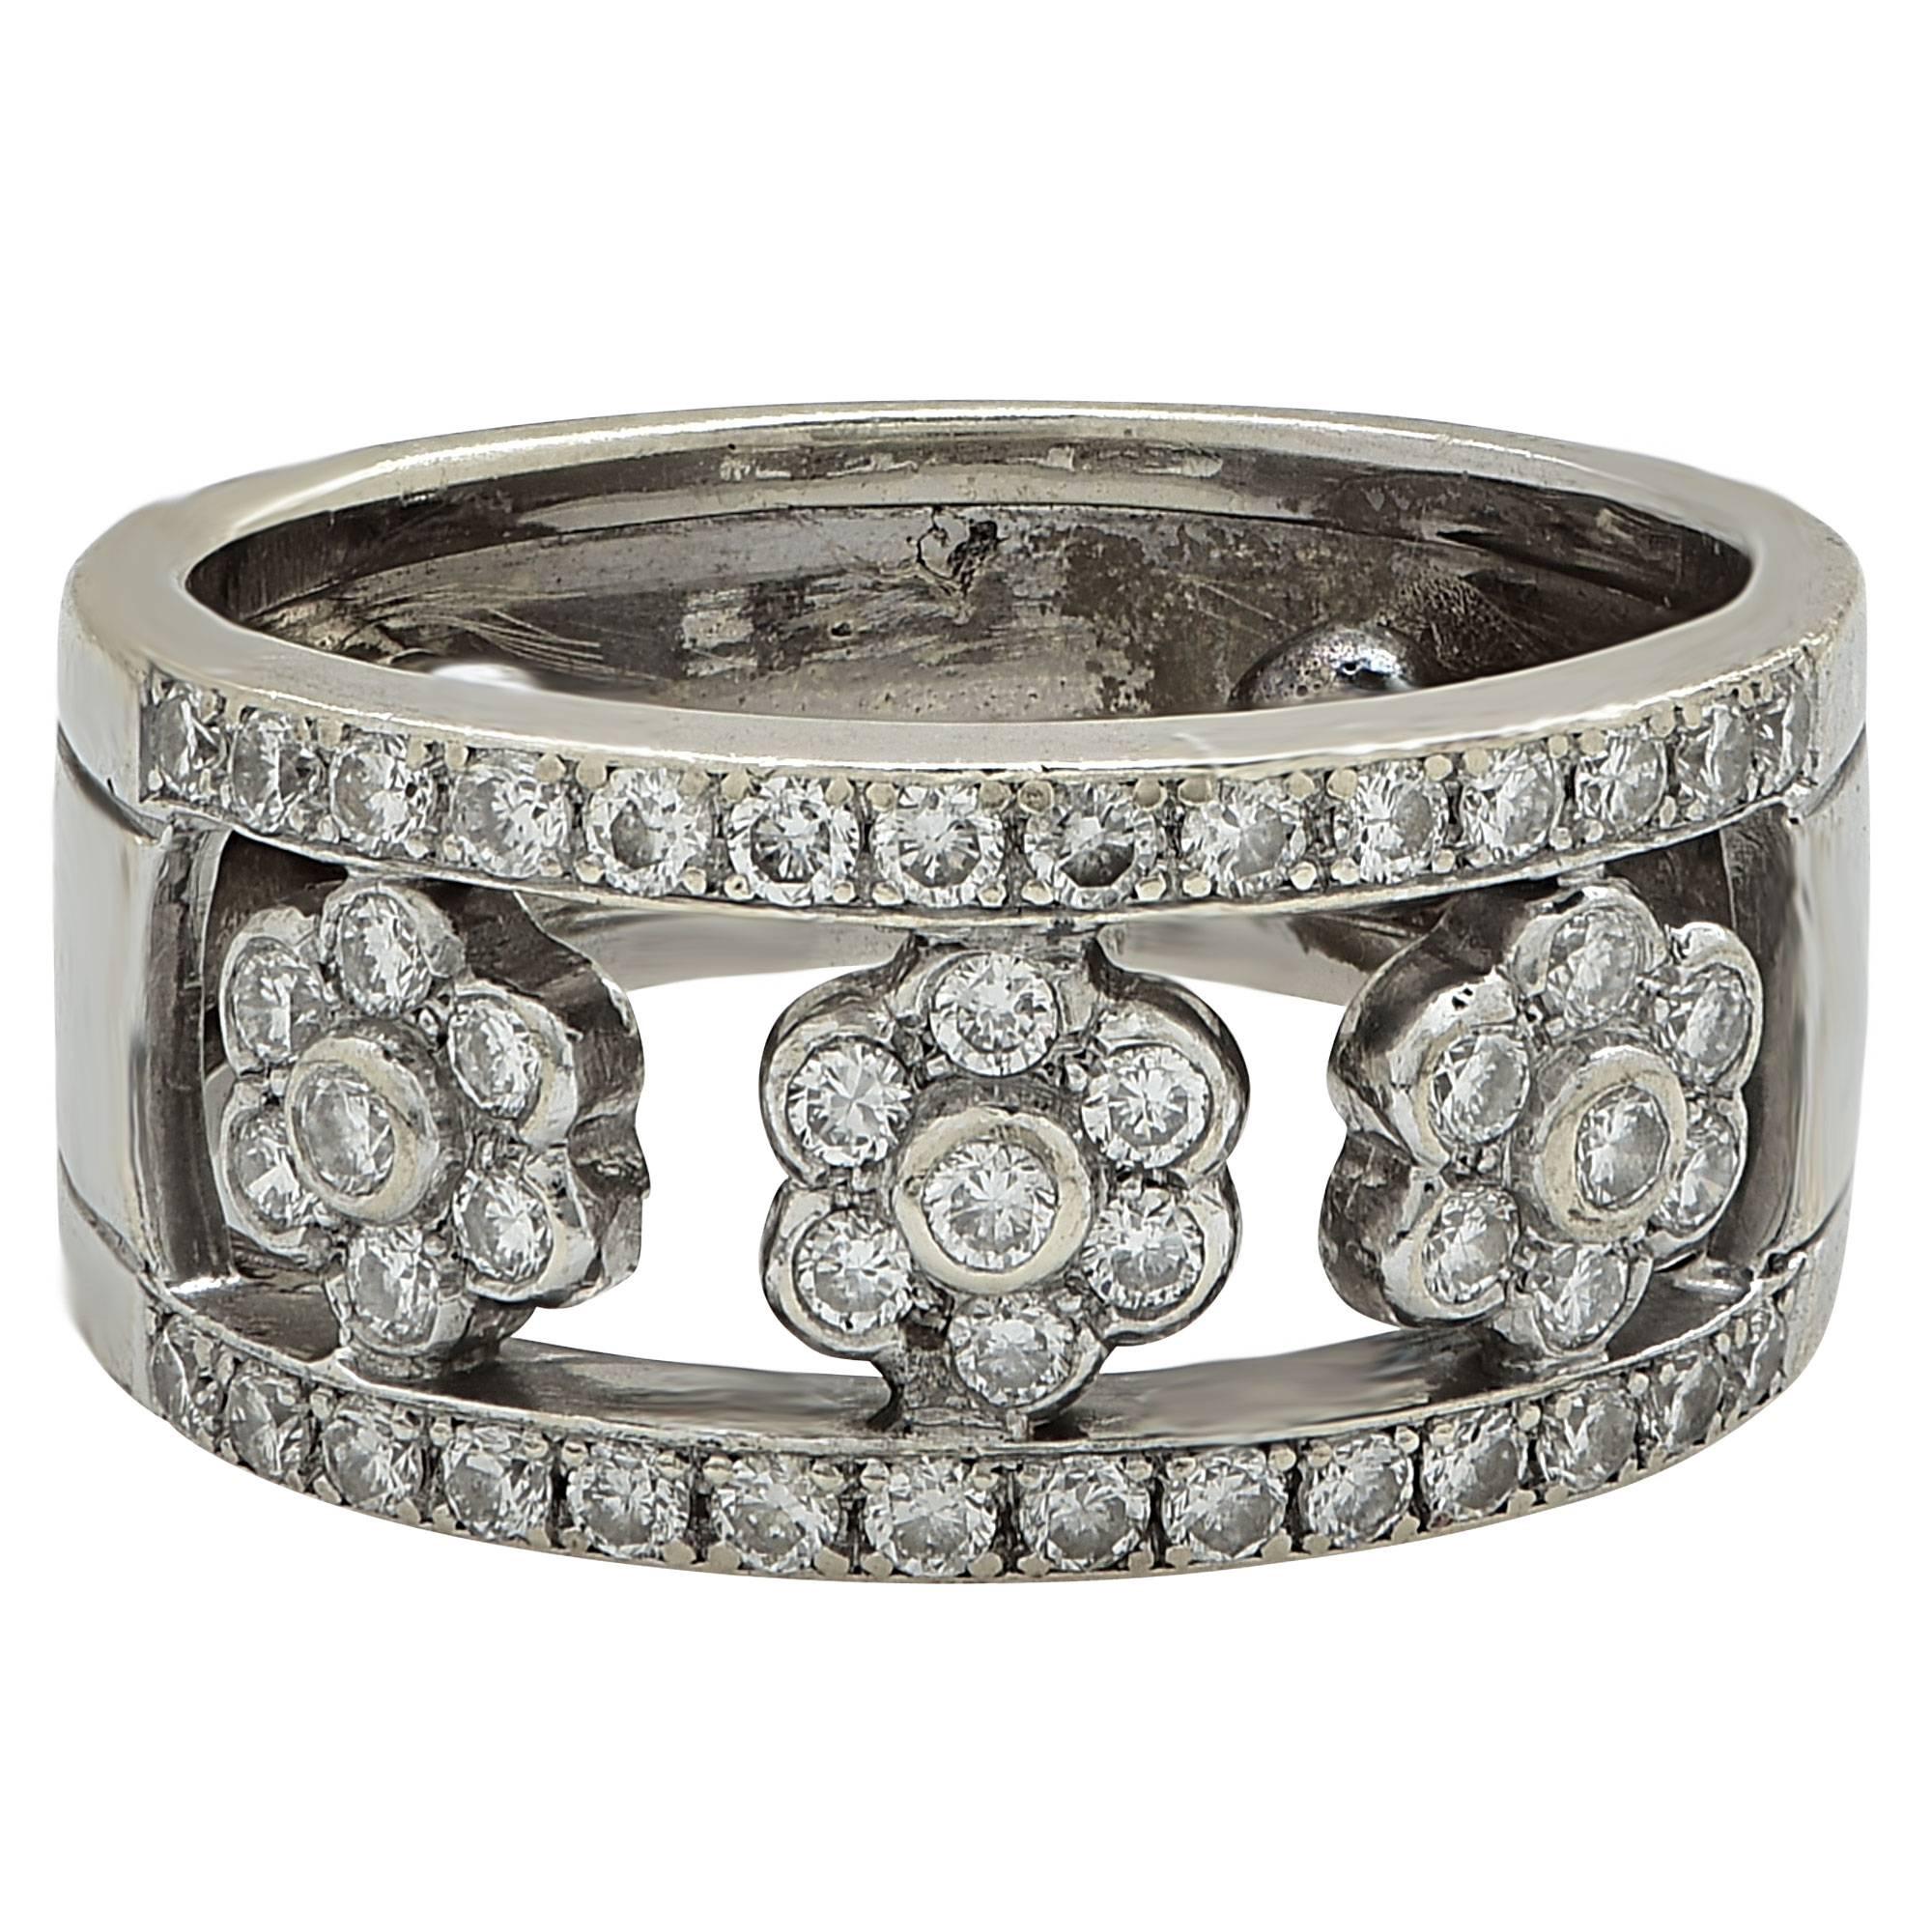 18k white gold band featuring 49 round brilliant cut diamonds weighing approximately .60cts total, G color VS clarity.

Metal weight: 7.79 grams

This diamond band is accompanied by a retail appraisal performed by a GIA Graduate Gemologist.